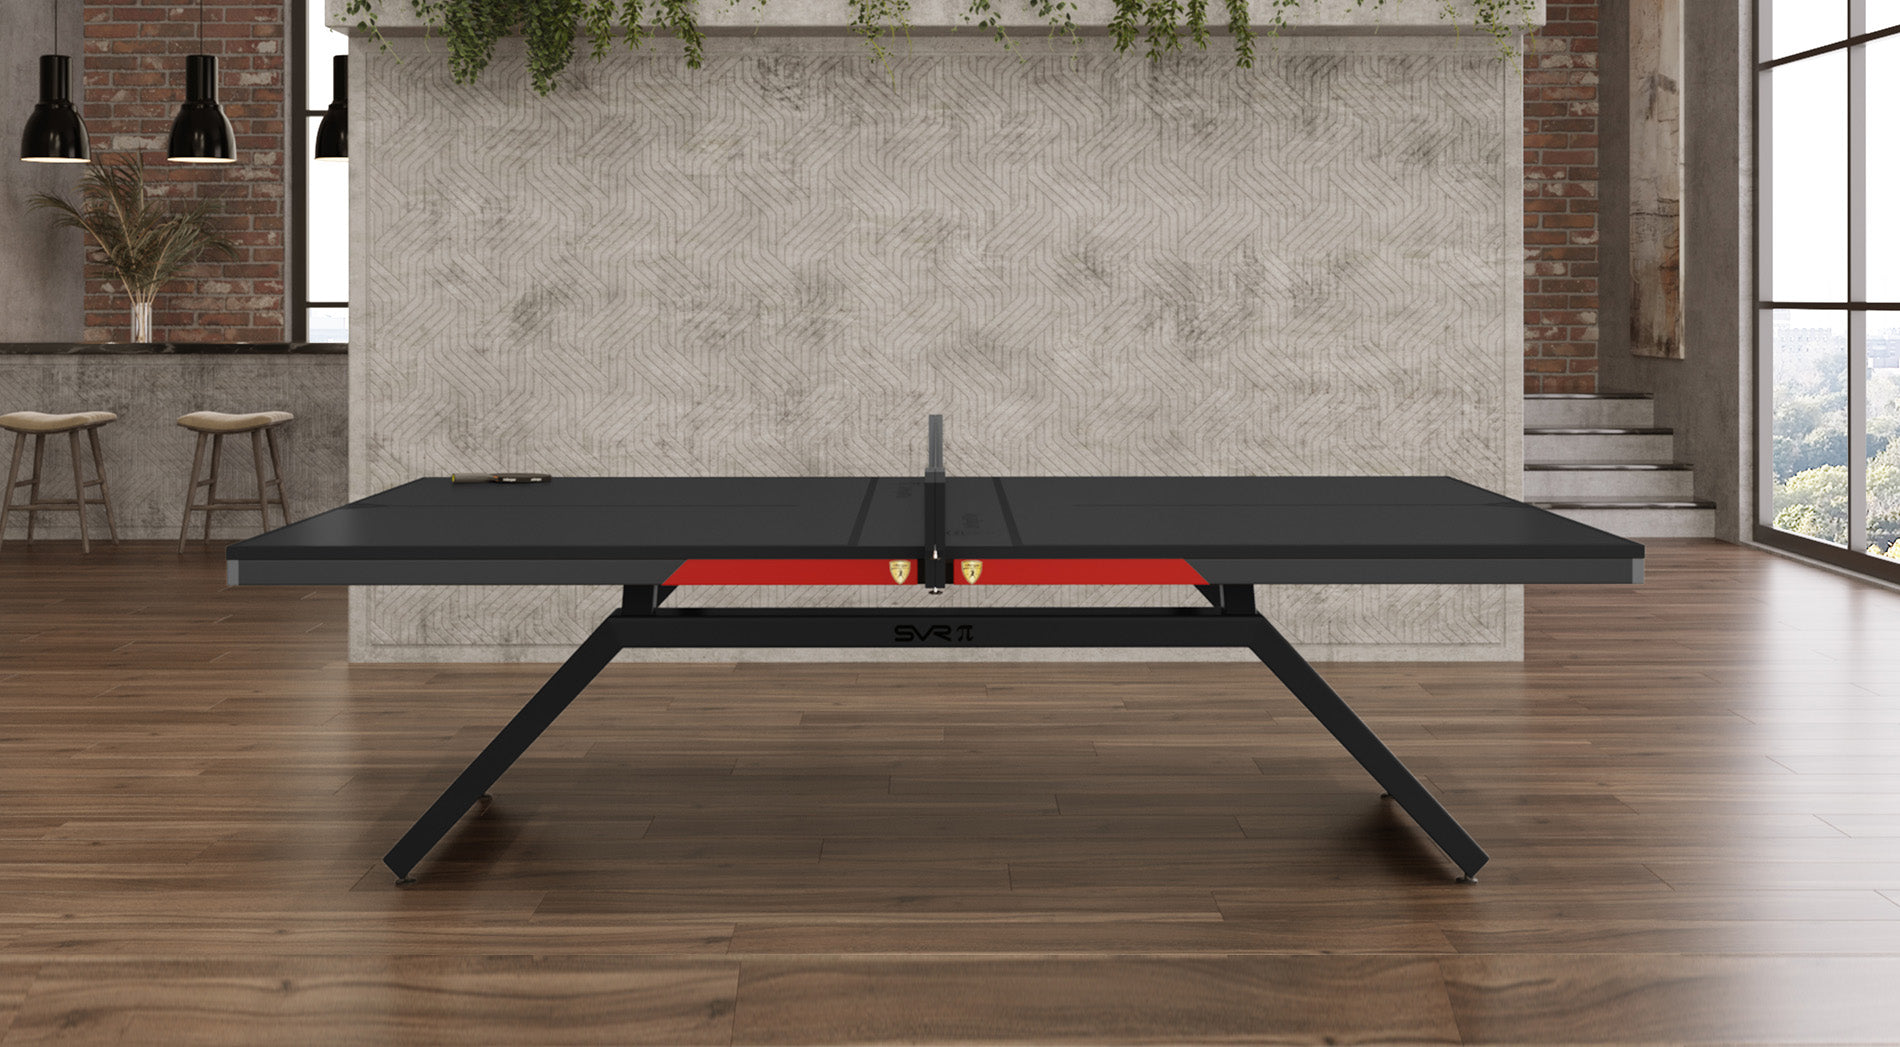 Killerspin Ping Pong Table and Table Tennis Equipment